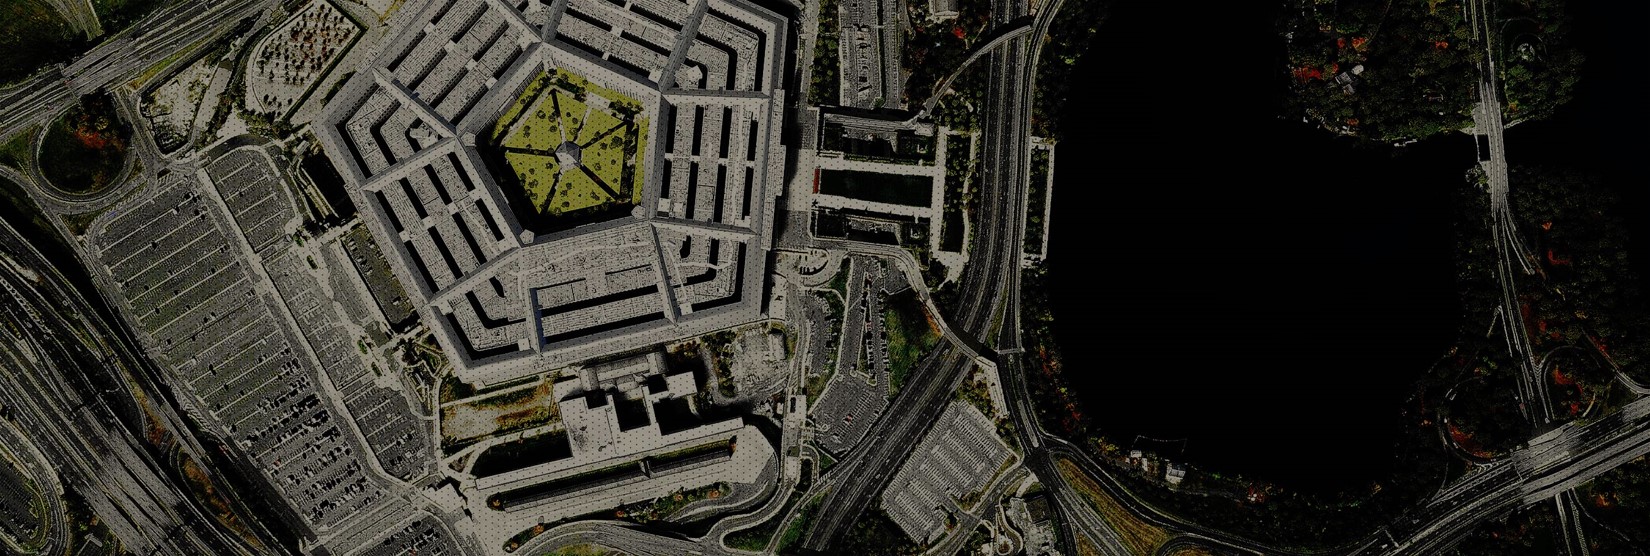 The pentagon building from above